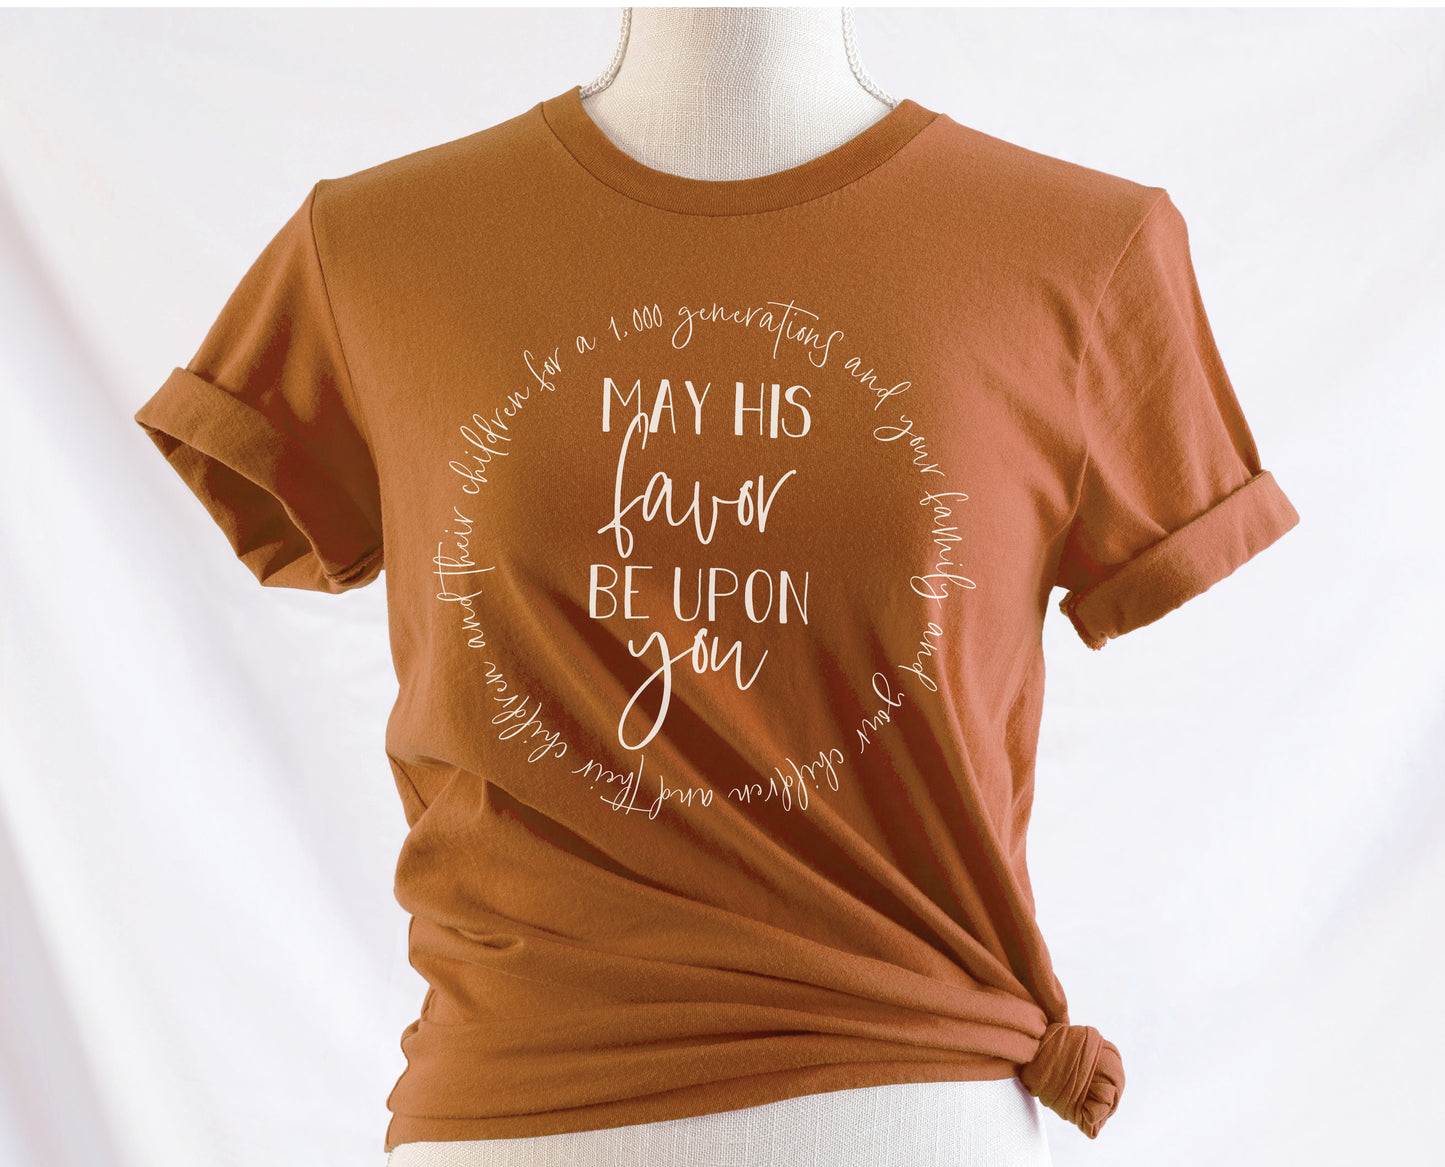 May His Favor Be Upon You for a thousand generations family & children Numbers 6 The Blessing Christian aesthetic circle design printed on soft toast rust orange t-shirt for women